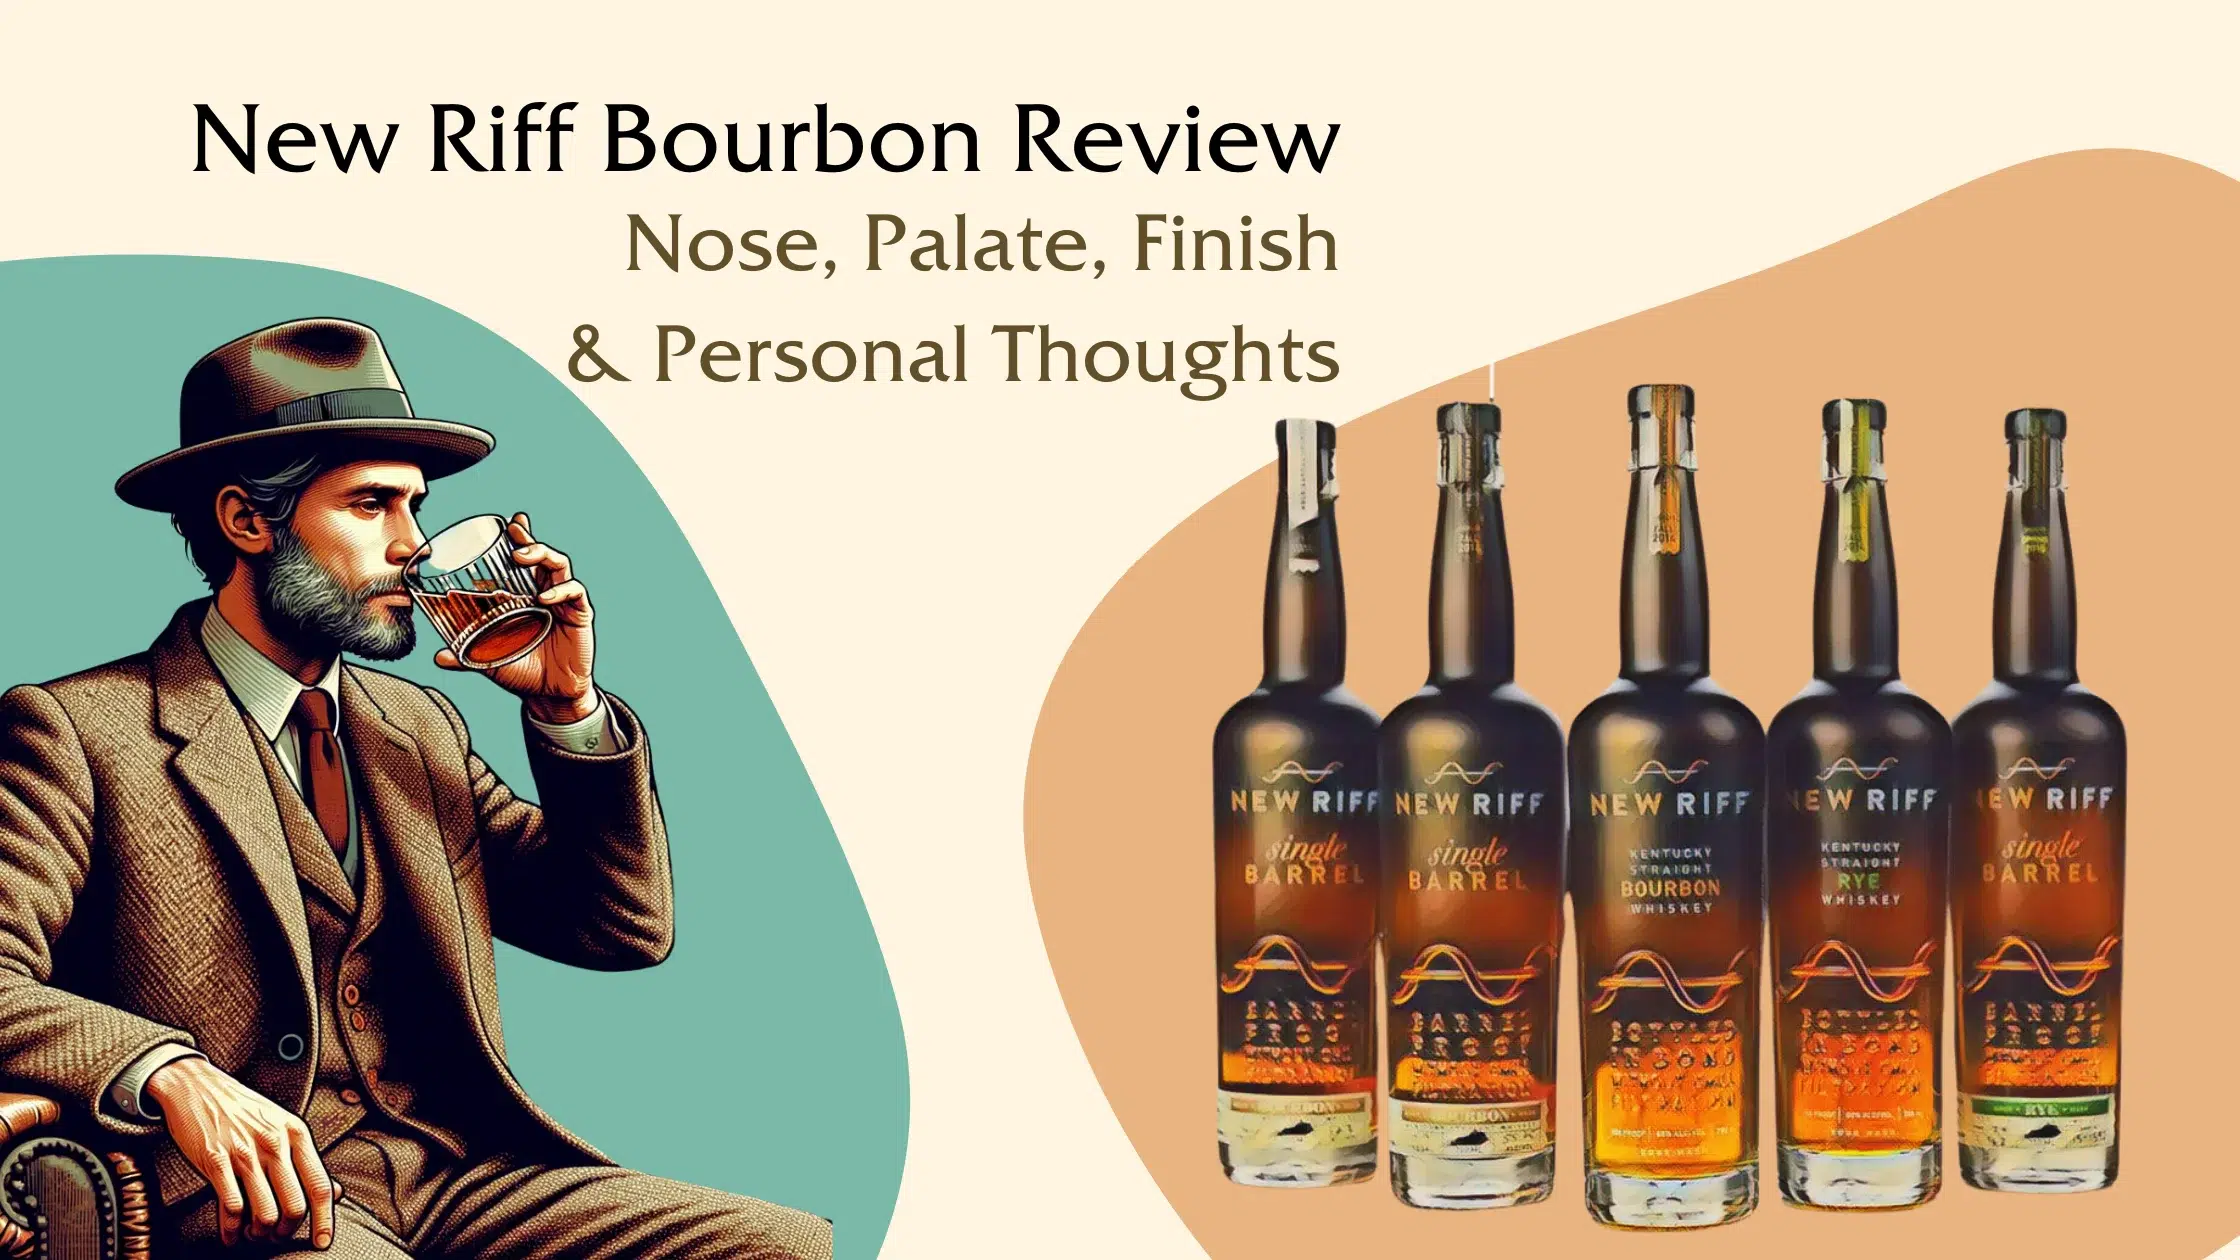 Man tasting bourbon, bottle review with tasting notes.